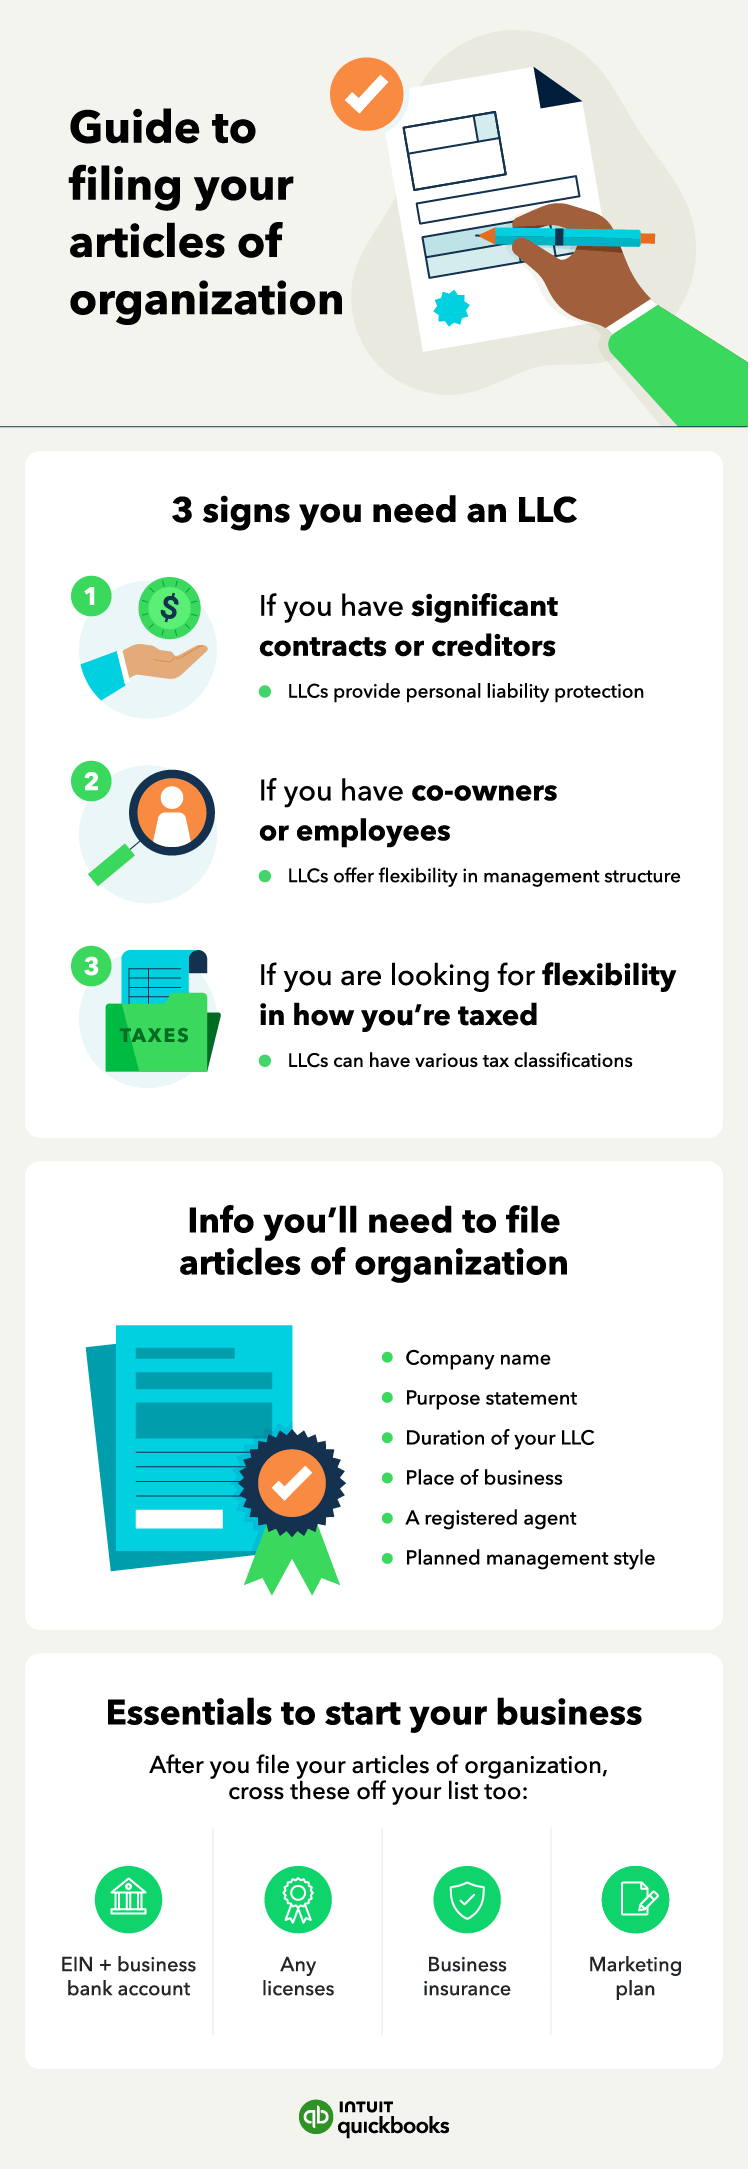 An infographic of the guide to filing articles of organization, including a list of things you need to file an LLC.